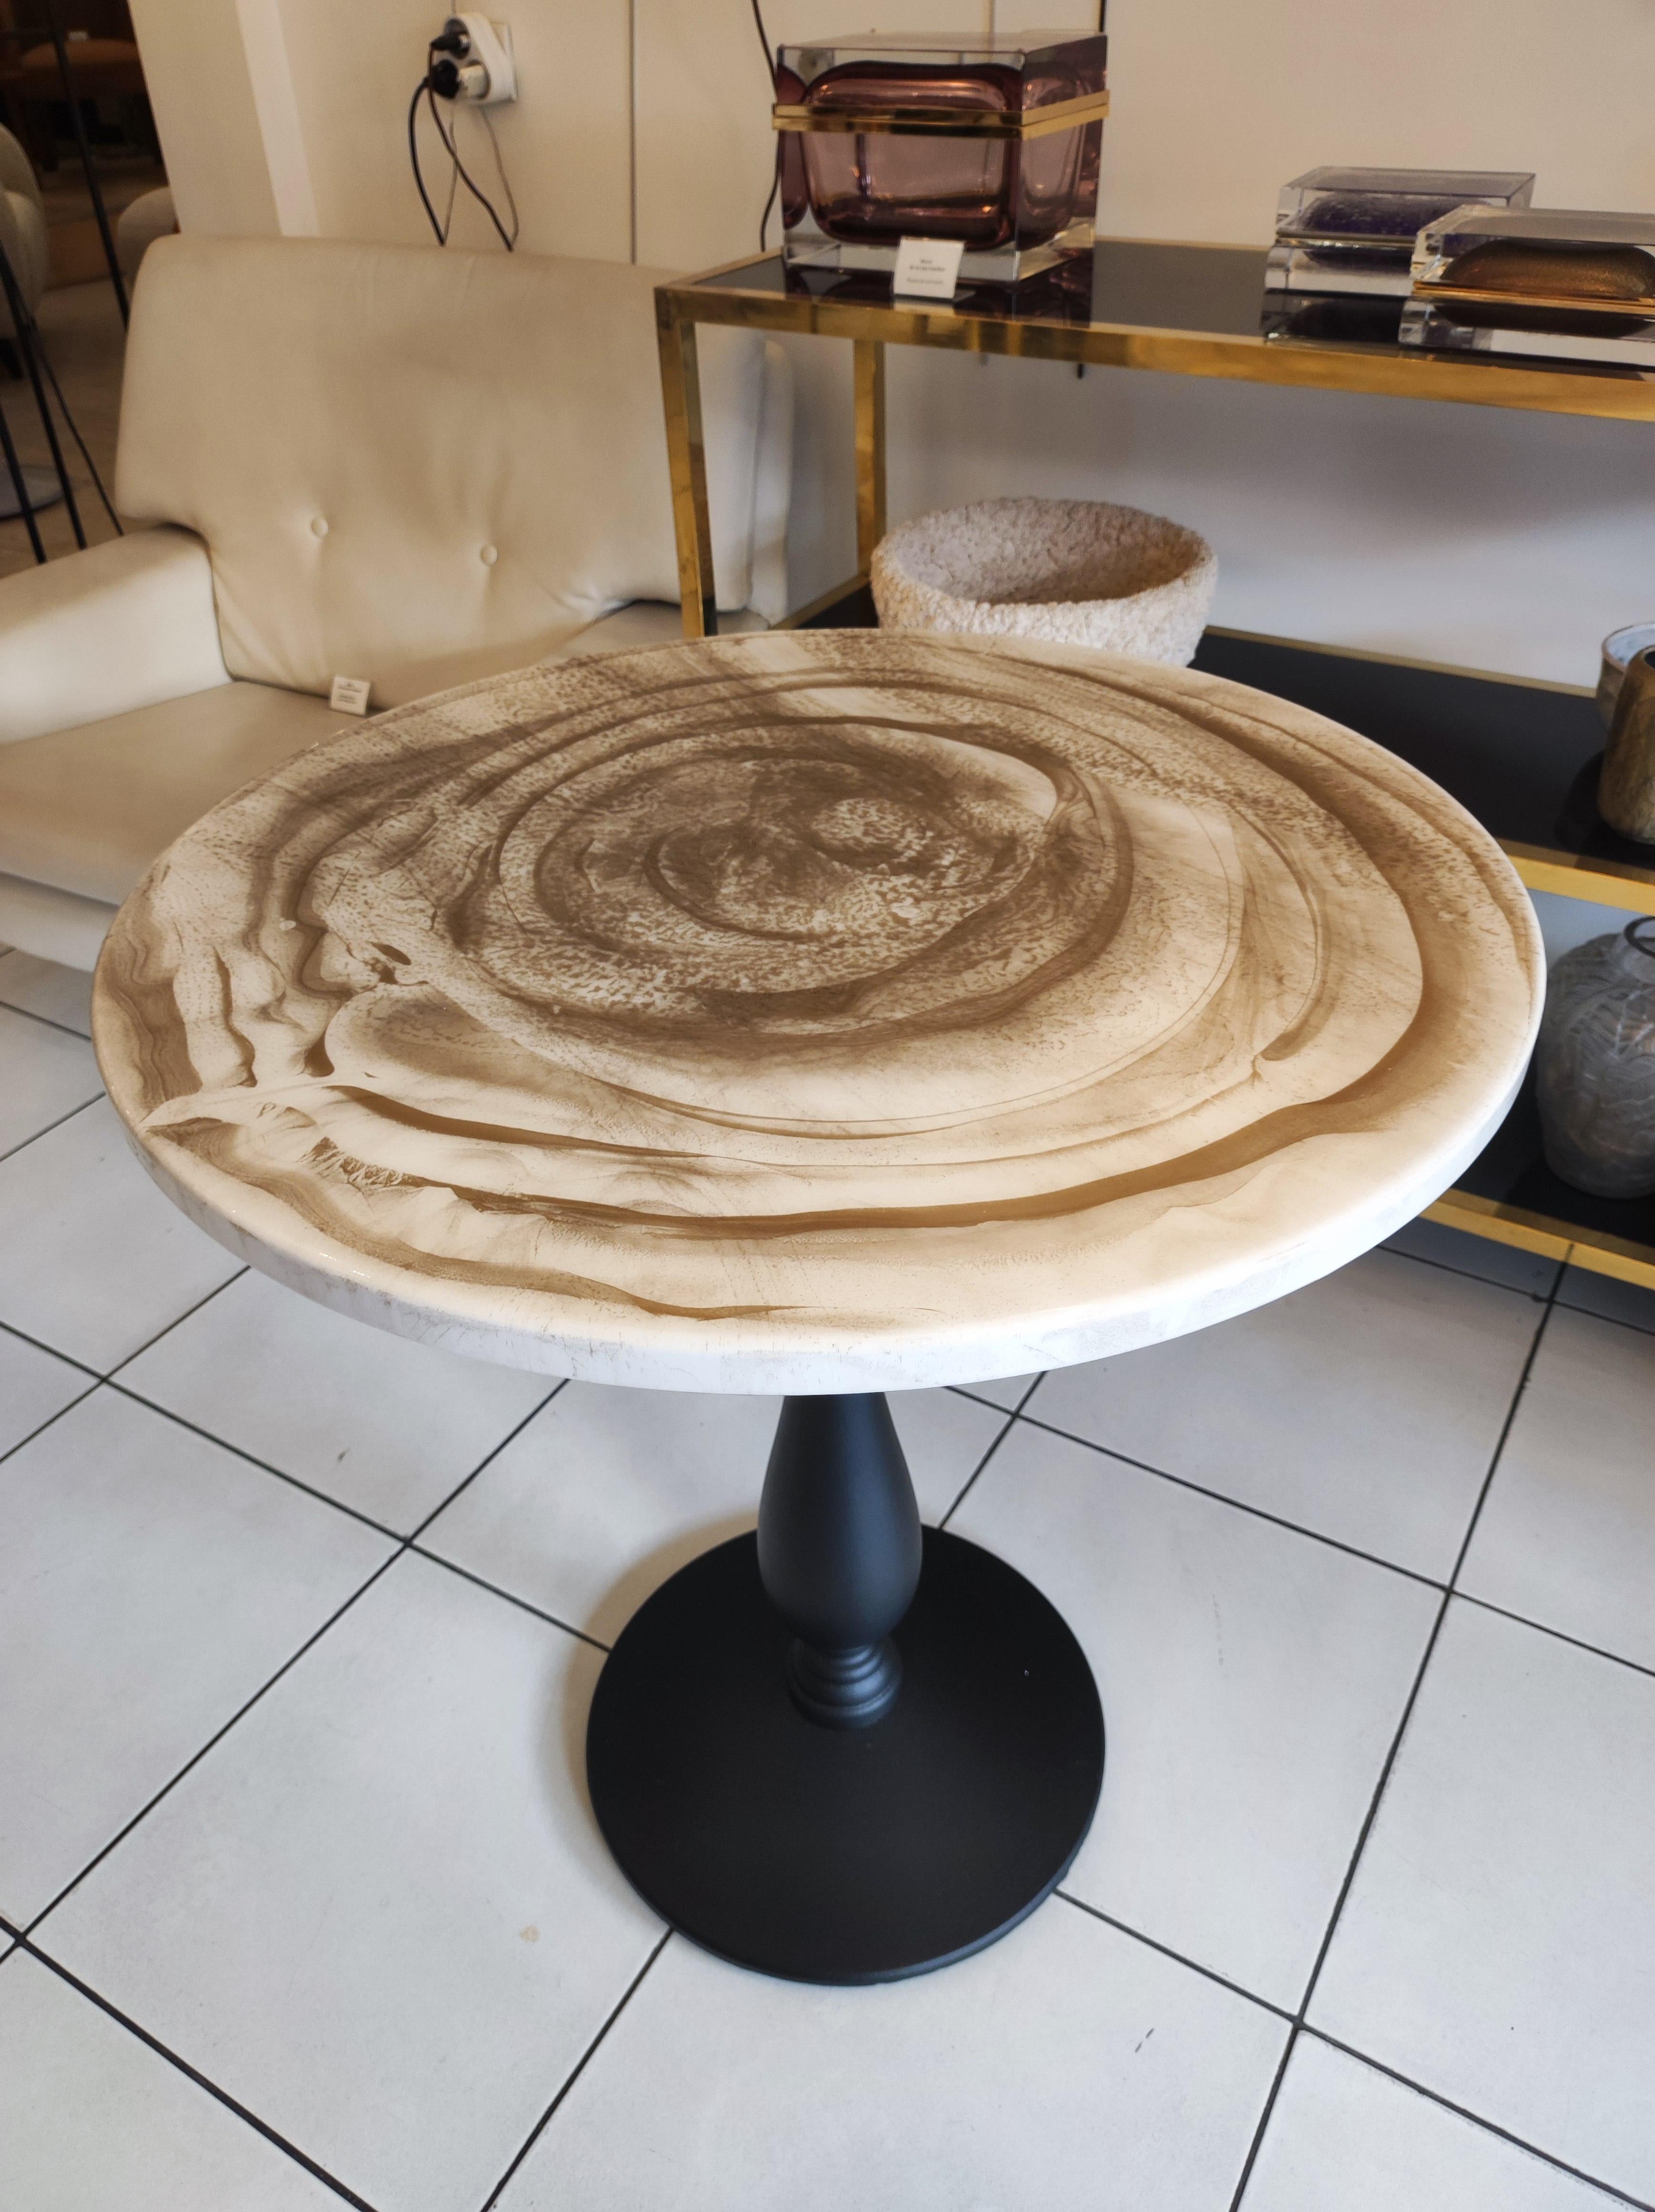 Gueridon / bistro table, cast iron painted black foot and laquered wood top with golden effects.